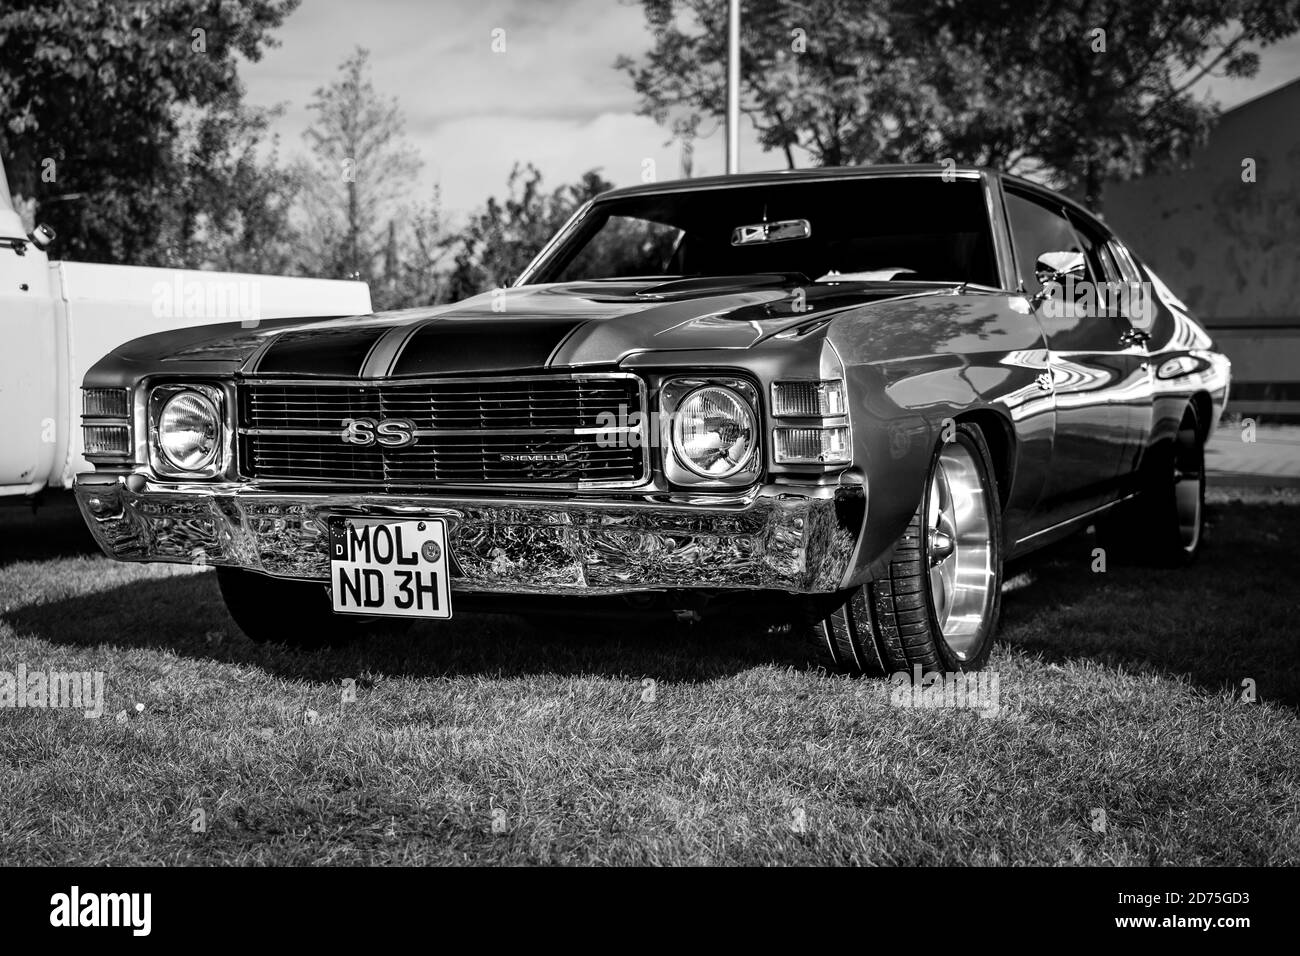 PAAREN IM GLIEN, GERMANY - OCTOBER 03, 2020: Mid-size car Chevrolet Chevelle SS, 1971. Black and white. Die Oldtimer Show 2020. Stock Photo